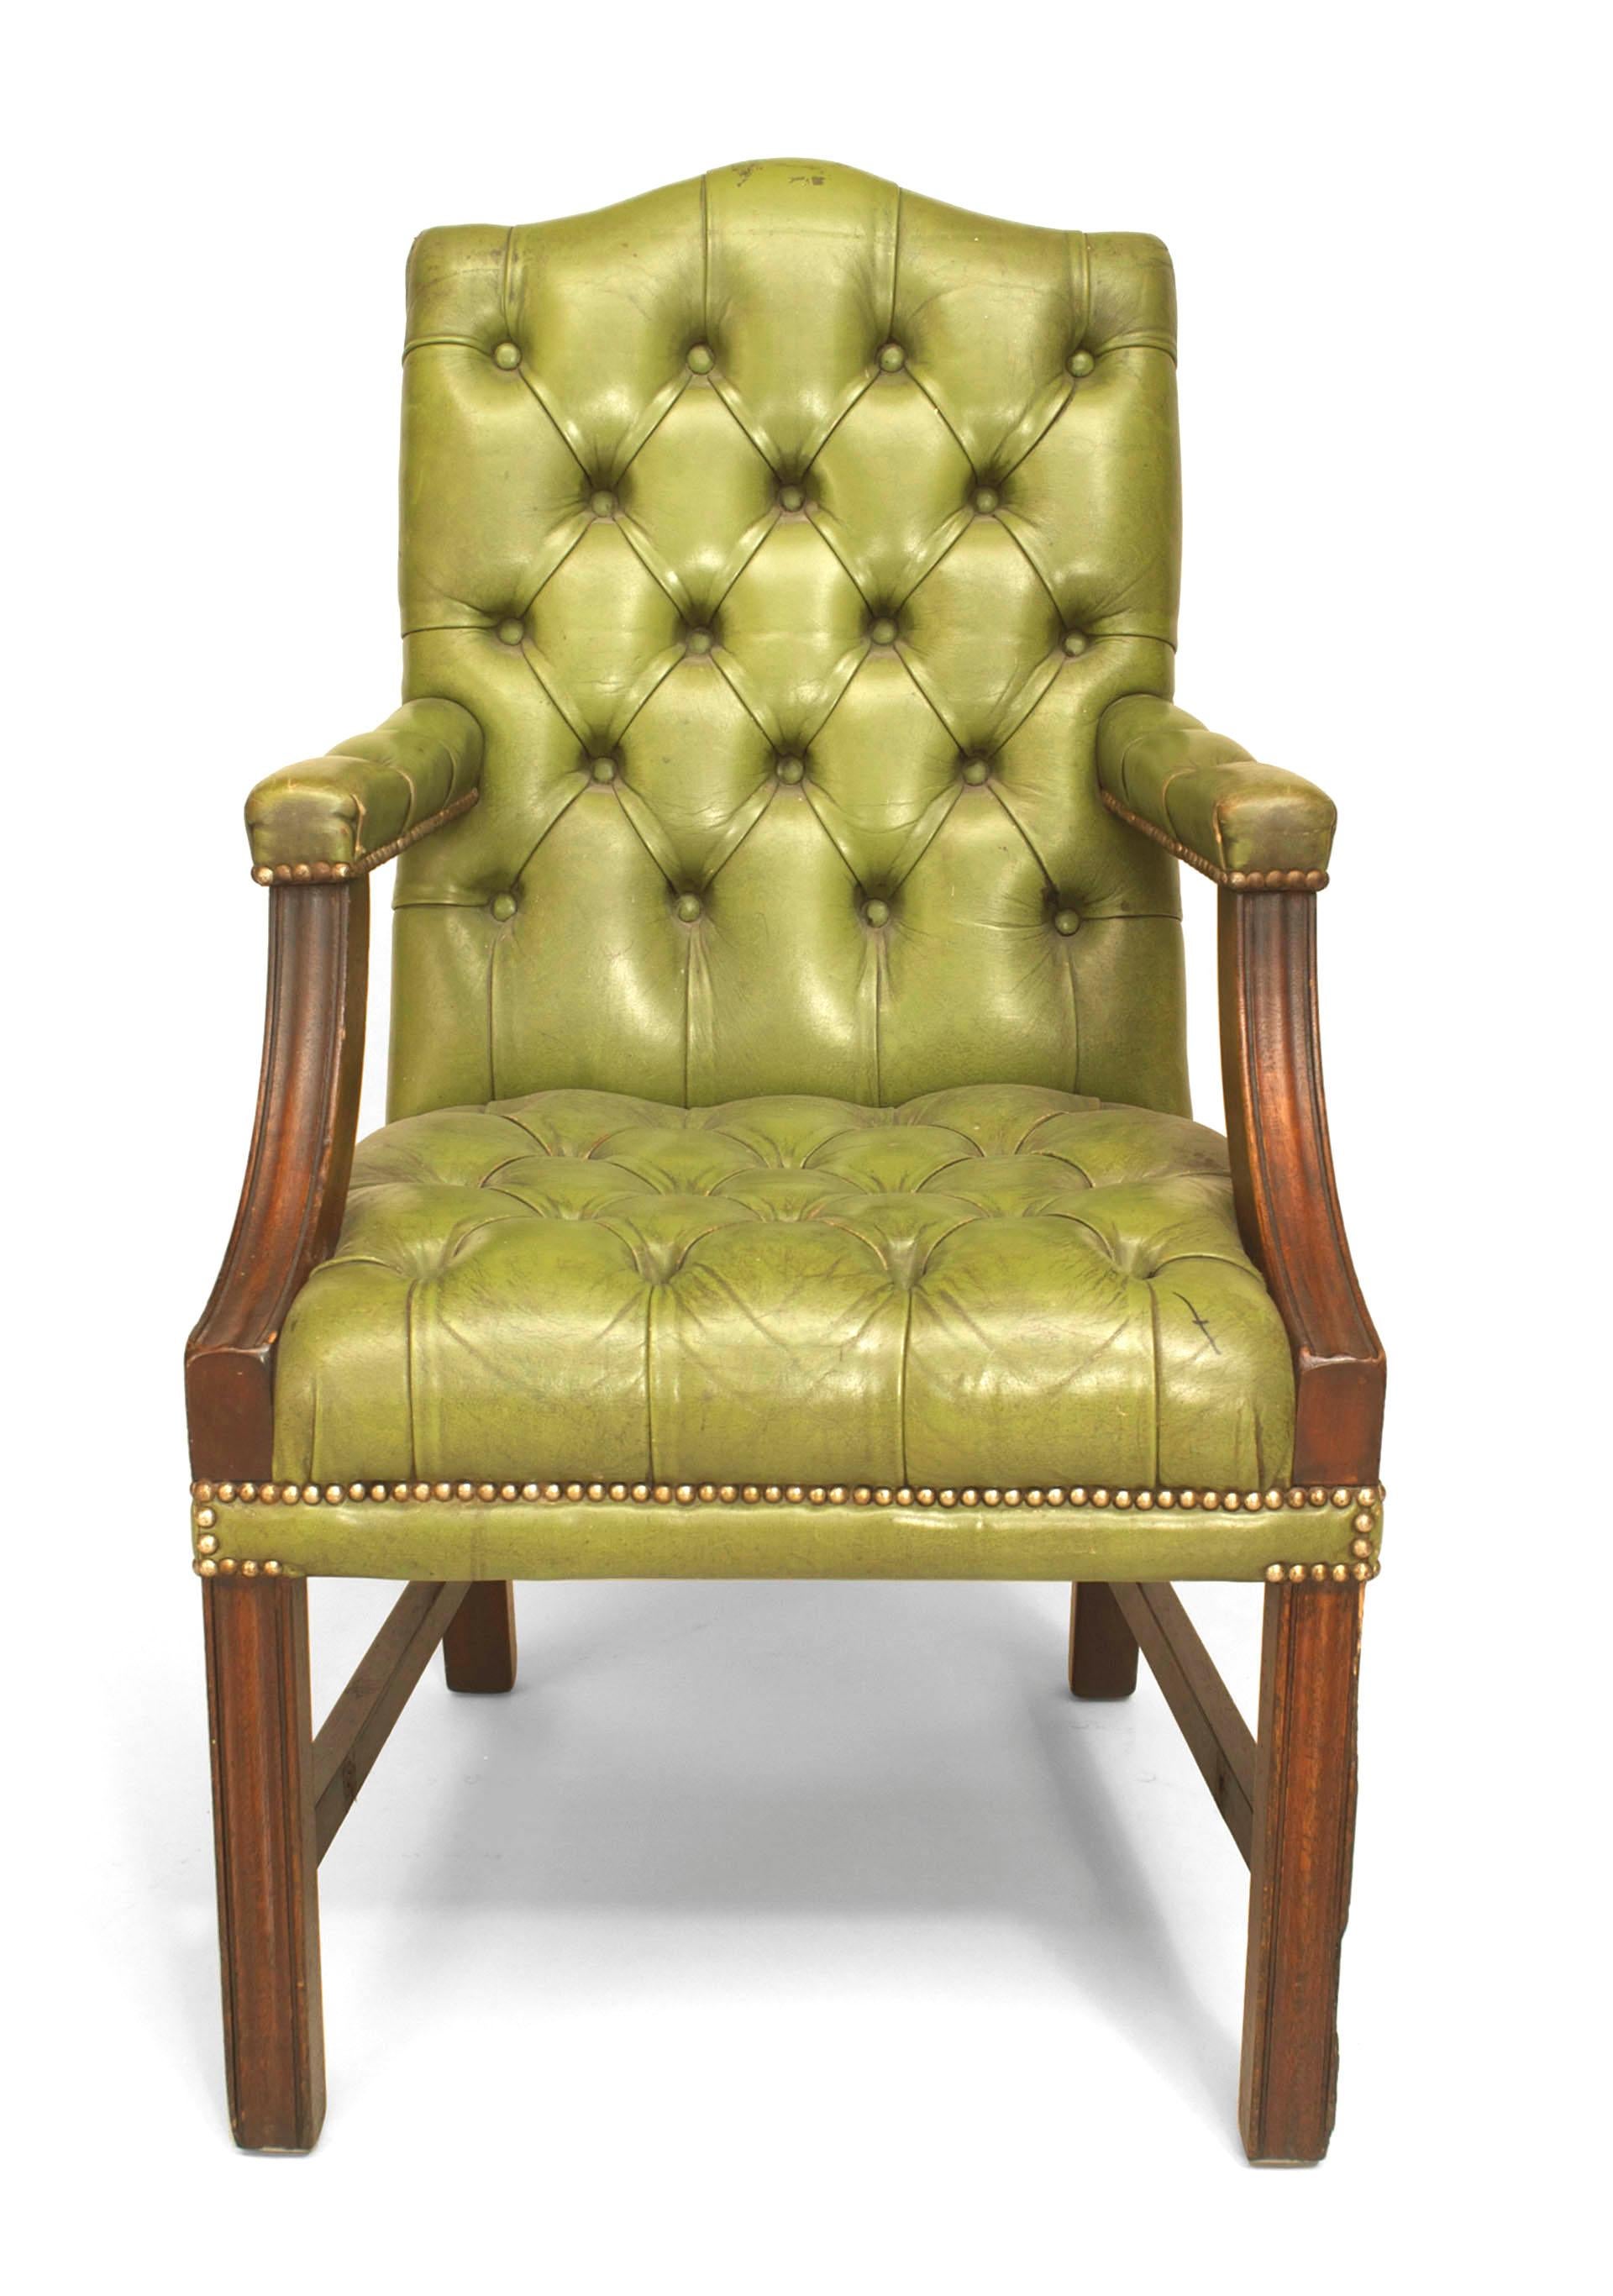 Set of 6 English Georgian style (late 19th Cent) mahogany arm open chairs with green tufted seat and back
